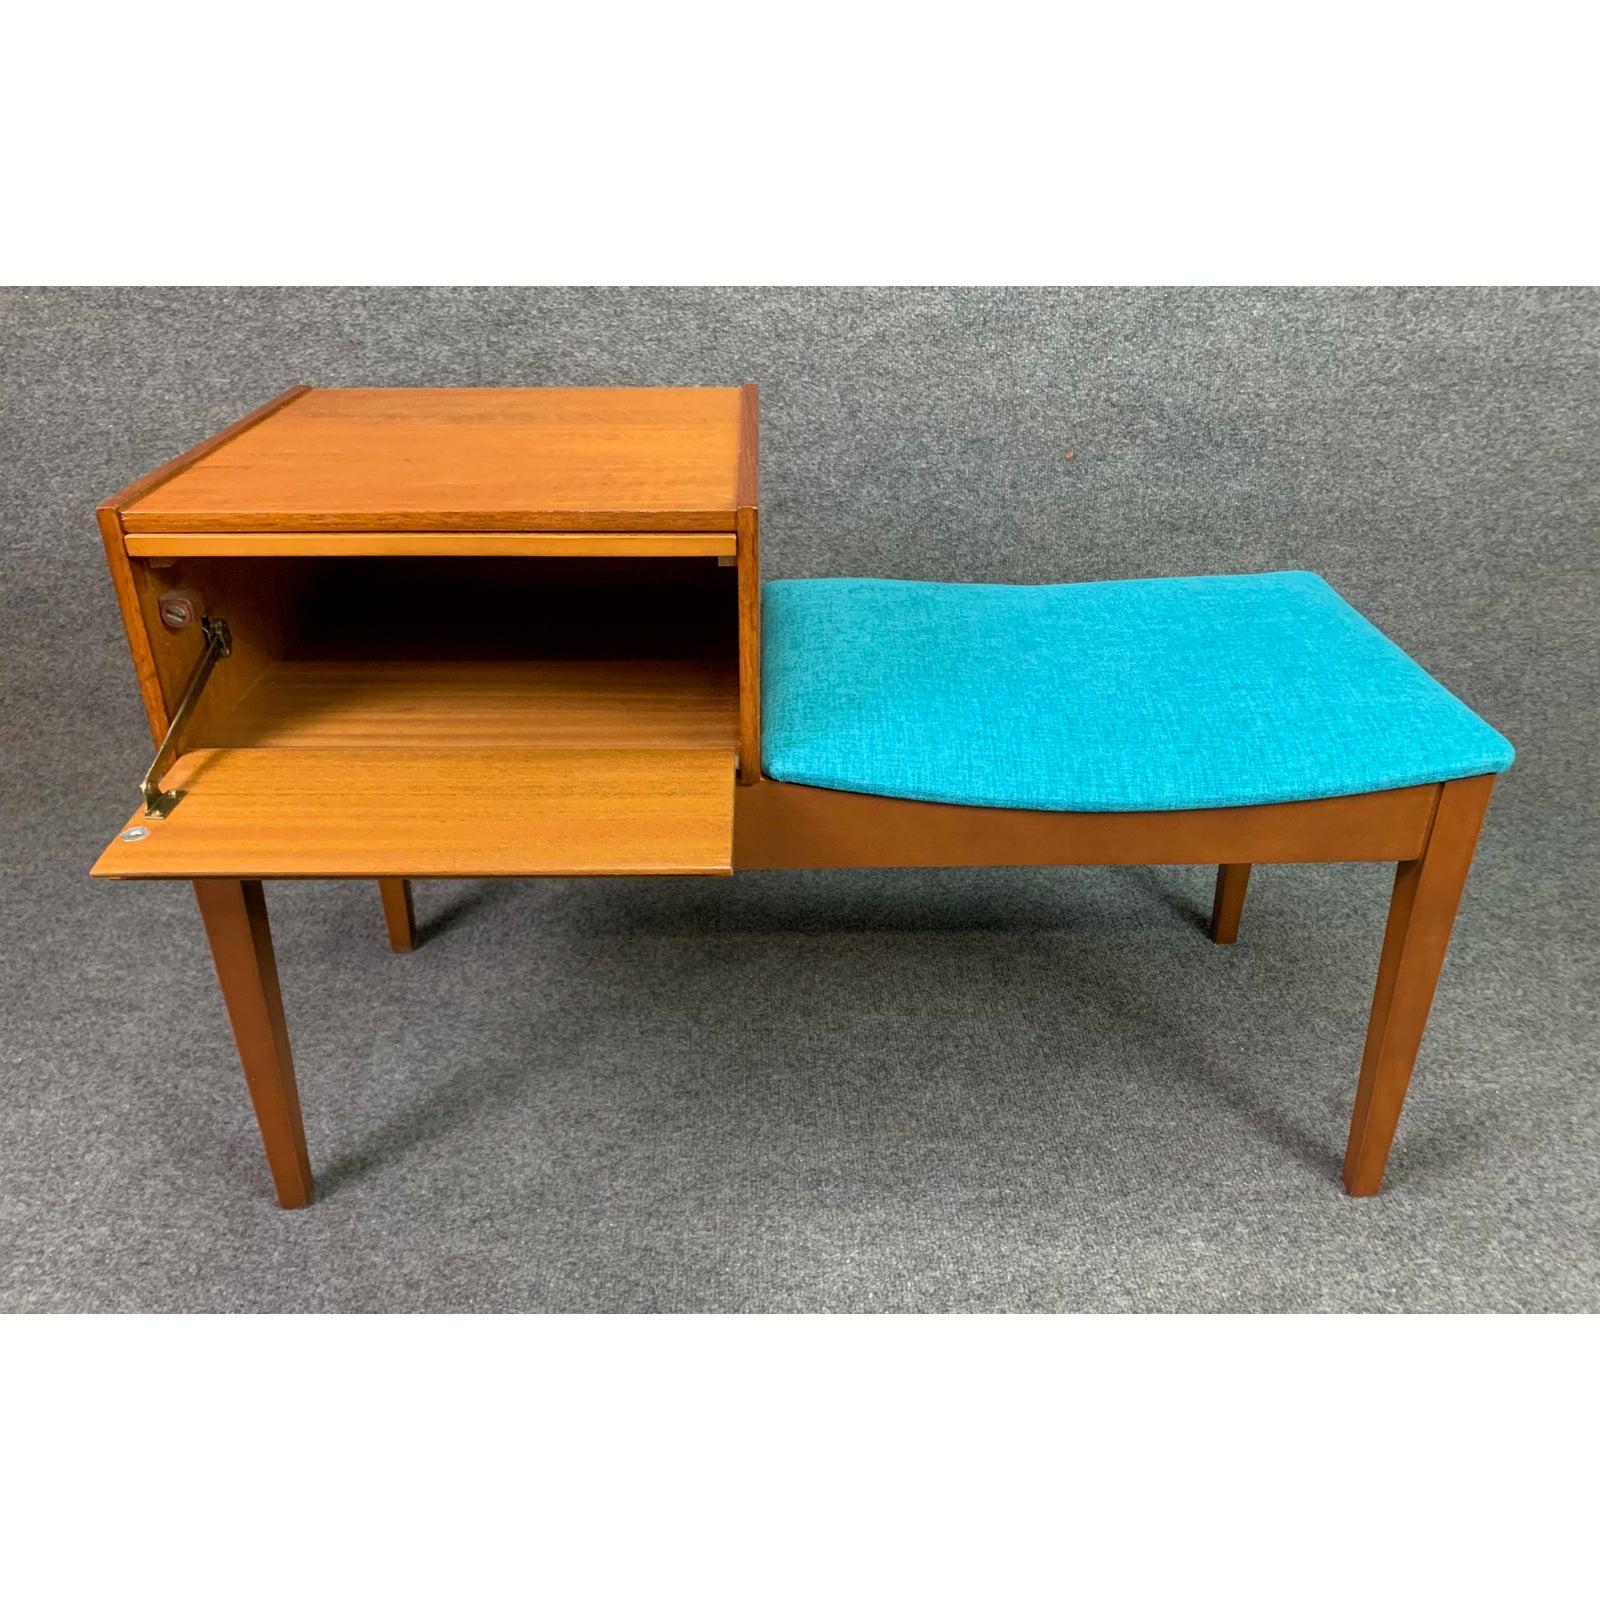 Here is a special British MCM telephone bench manufactured by Chippy in England in the 1960s.
This rare piece, recently imported from UK to California before its restoration, features a teak storage cubby with a drop down door and a slide out tray,